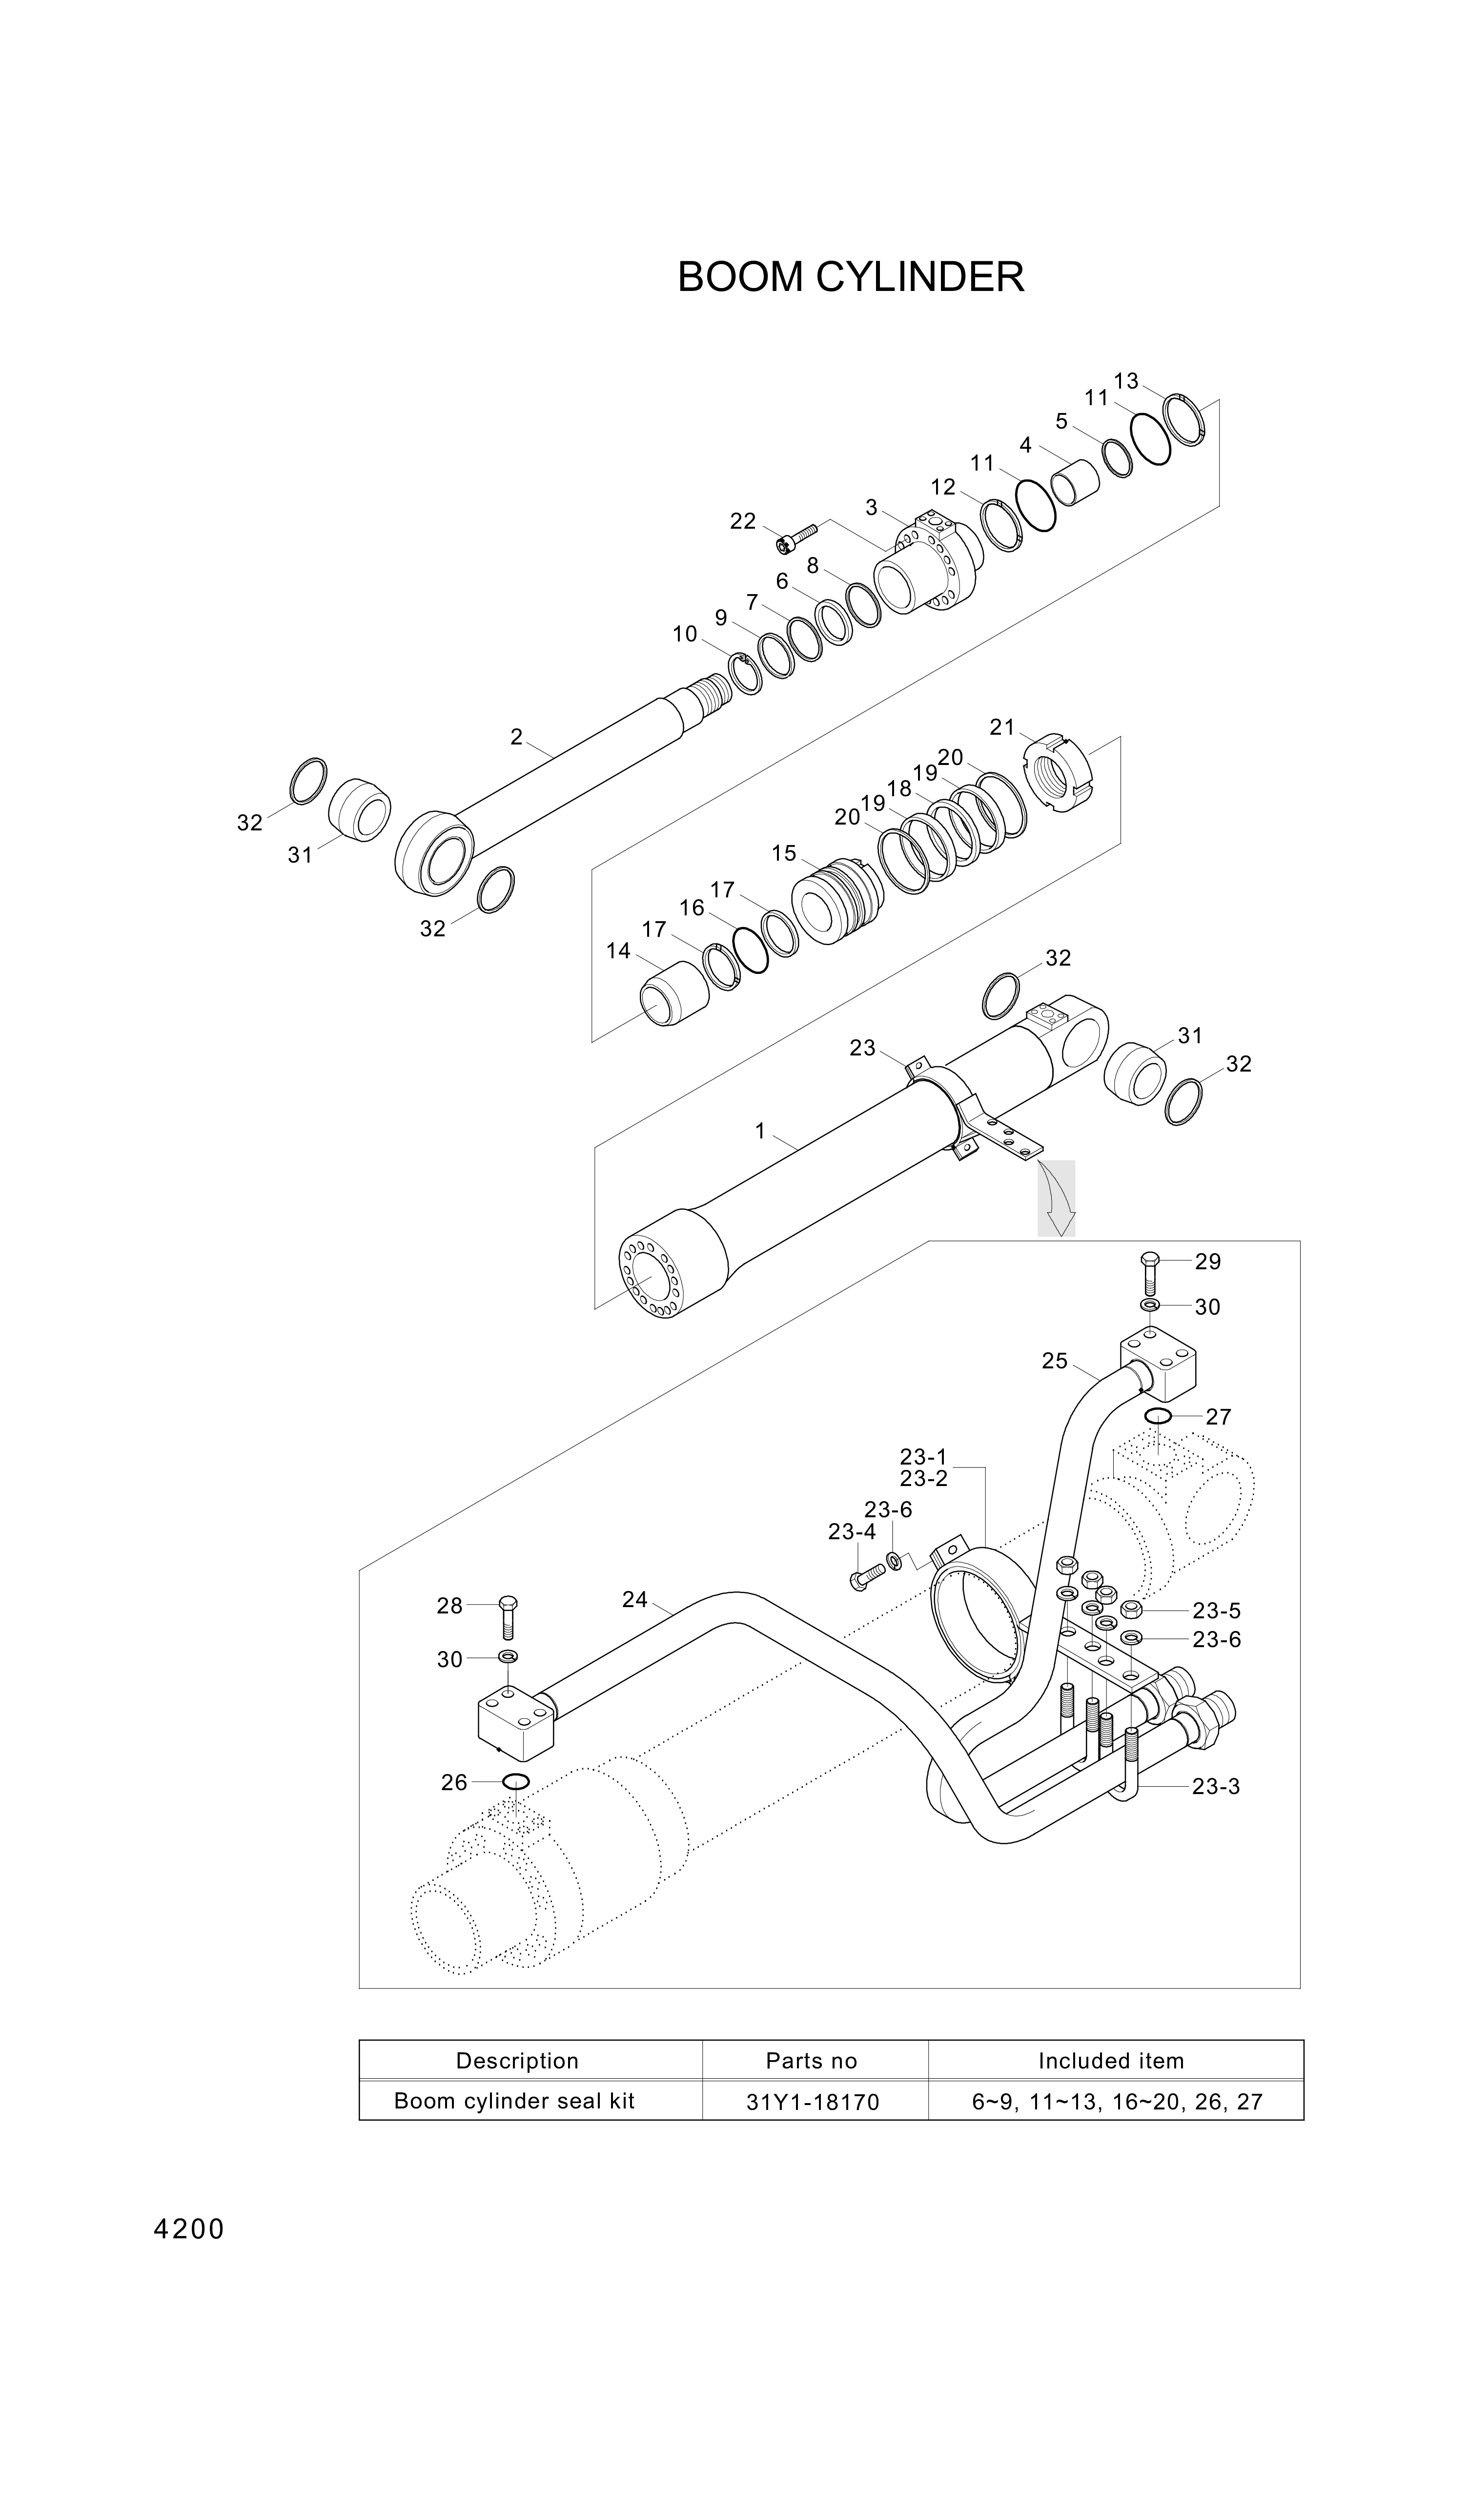 drawing for Hyundai Construction Equipment 000020 - BAND (figure 5)